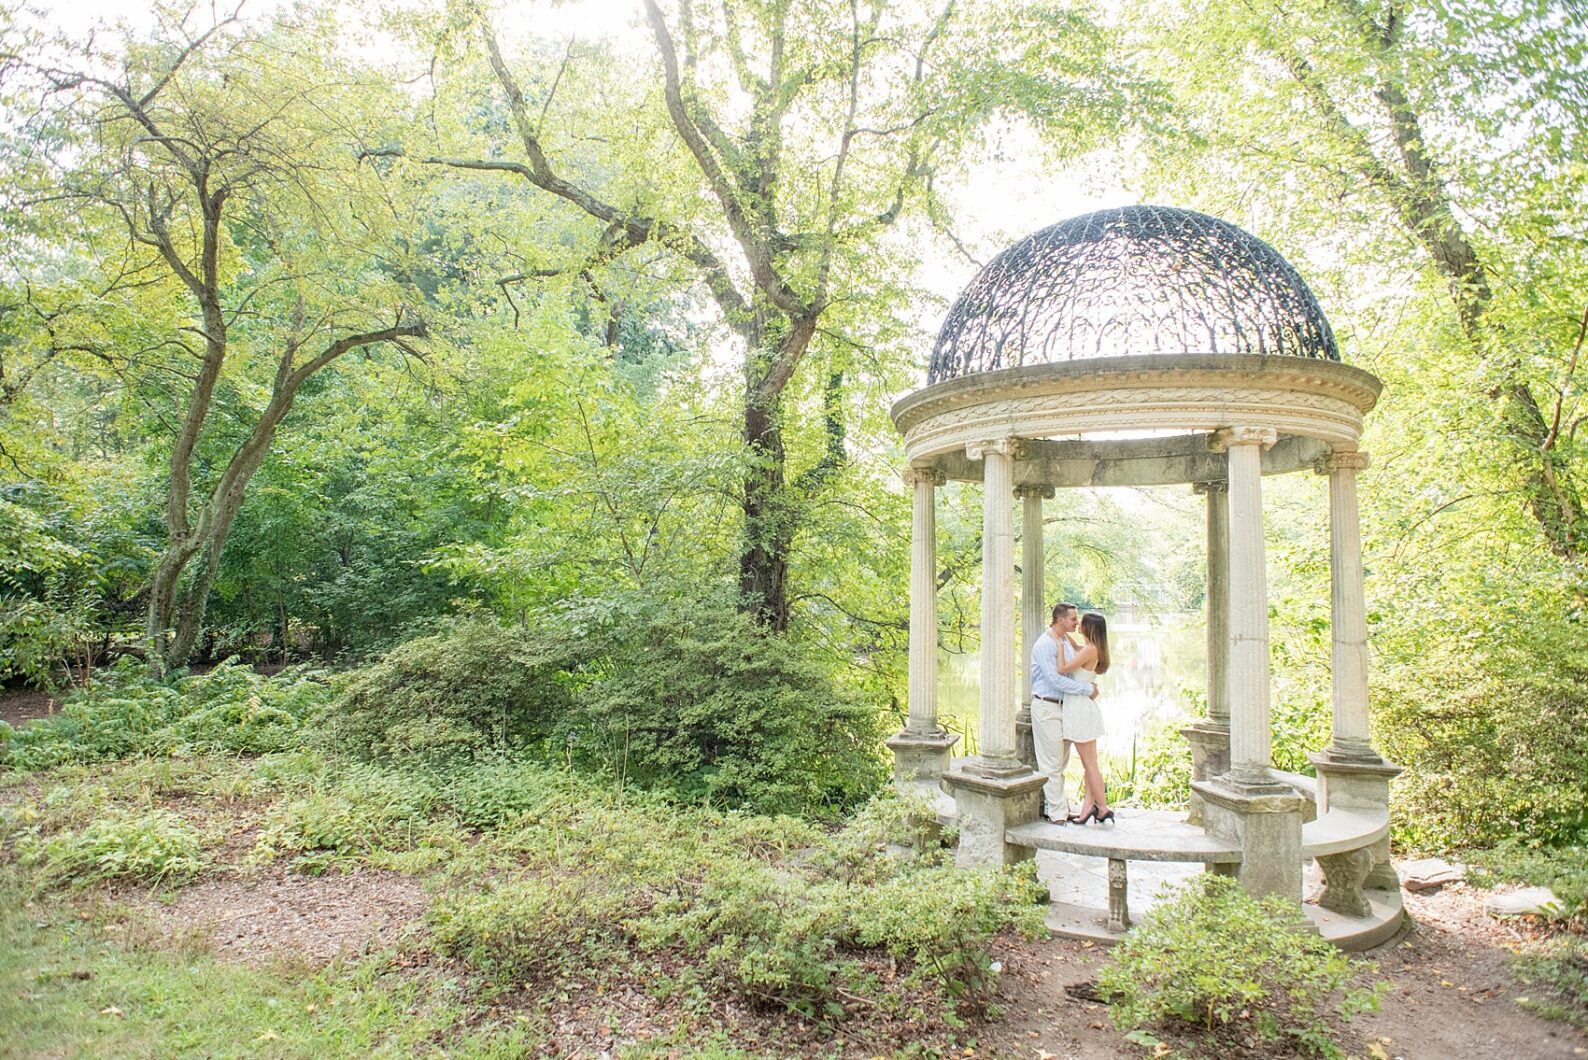 Mikkel Paige Photography photo of an Old Westbury Gardens engagement session on Long Island in the "temple of love" lakeside location.